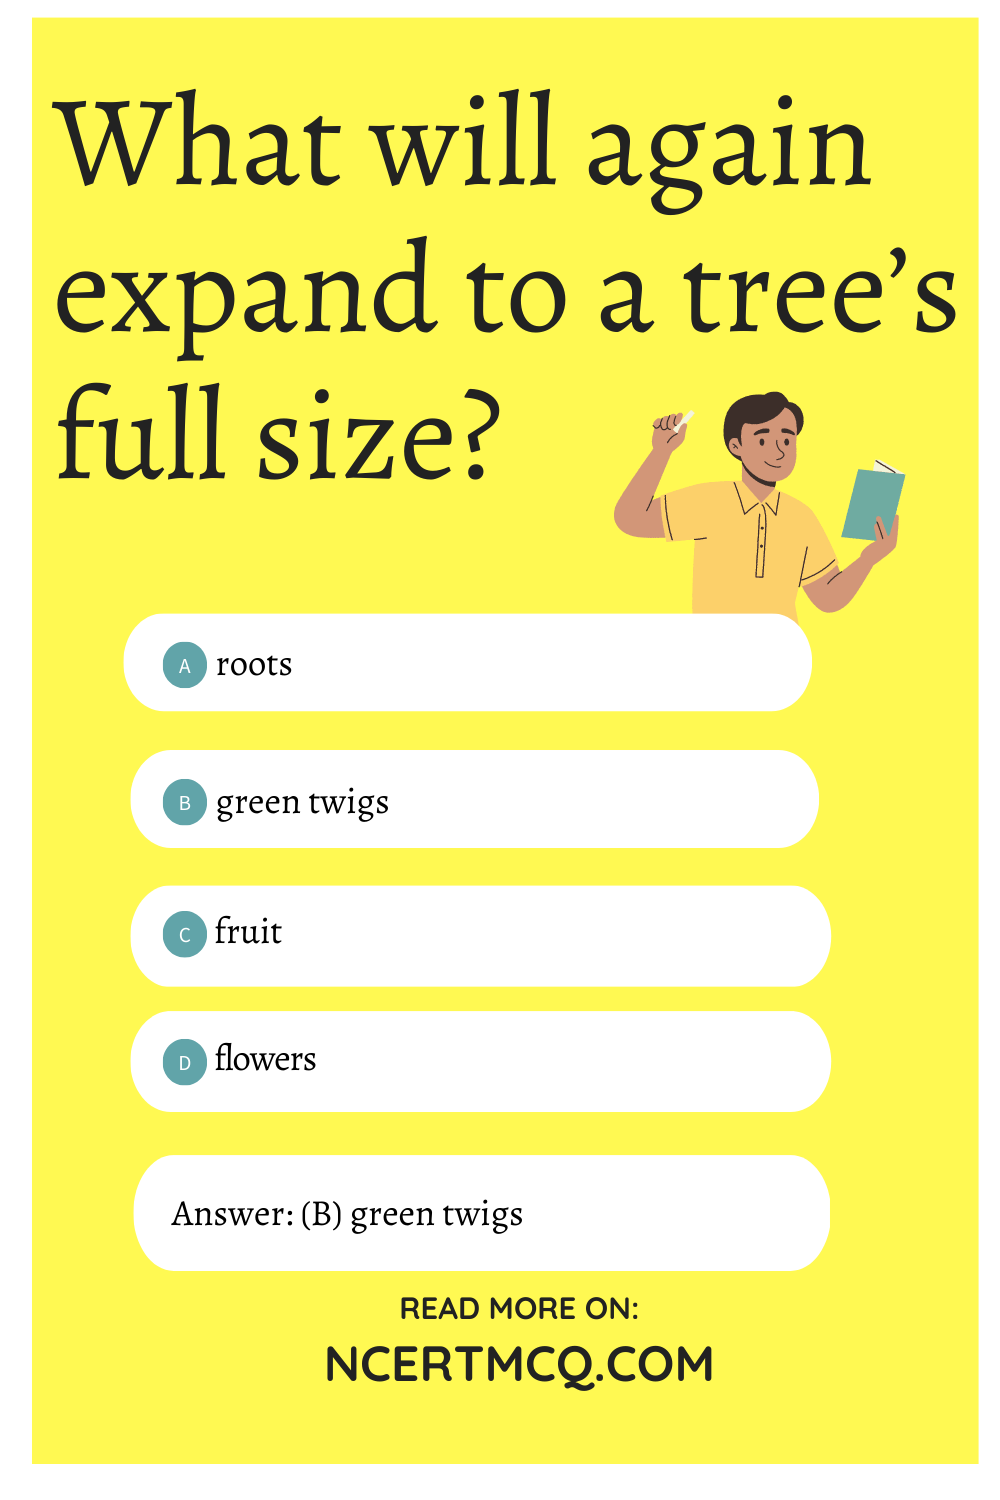 What will again expand to a tree’s full size?